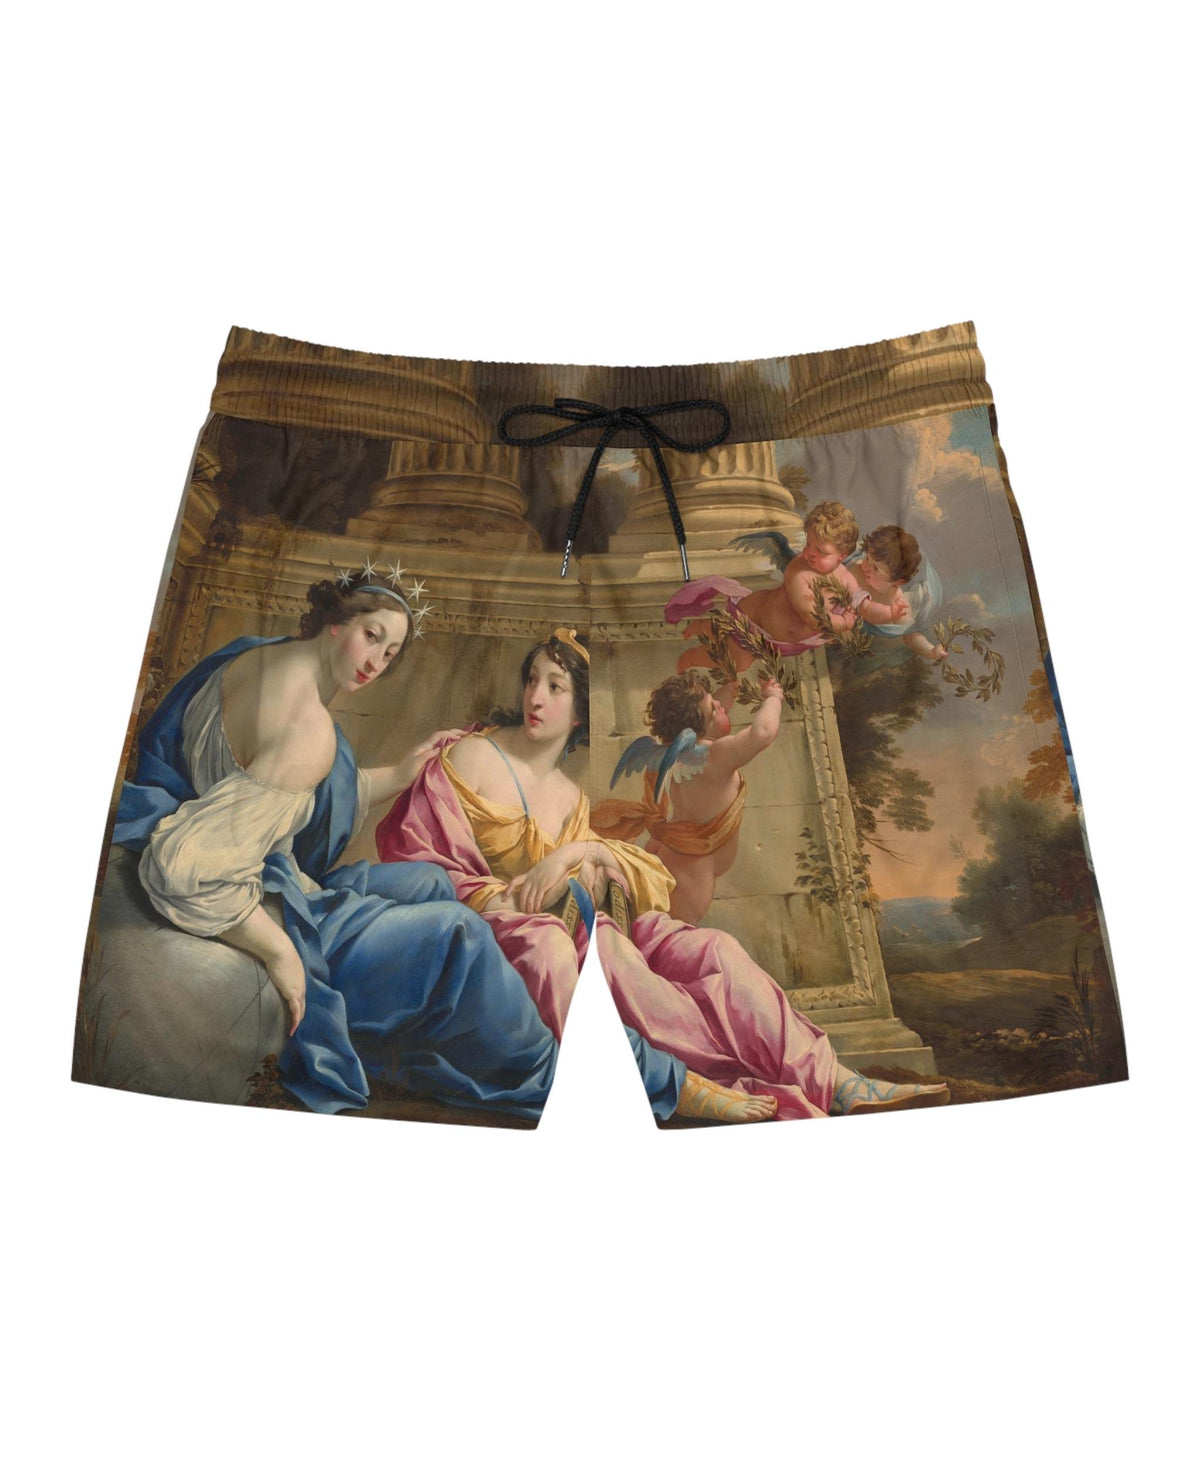 Art Print Swim Shorts | The Muses Urania and Calliope by Vouet